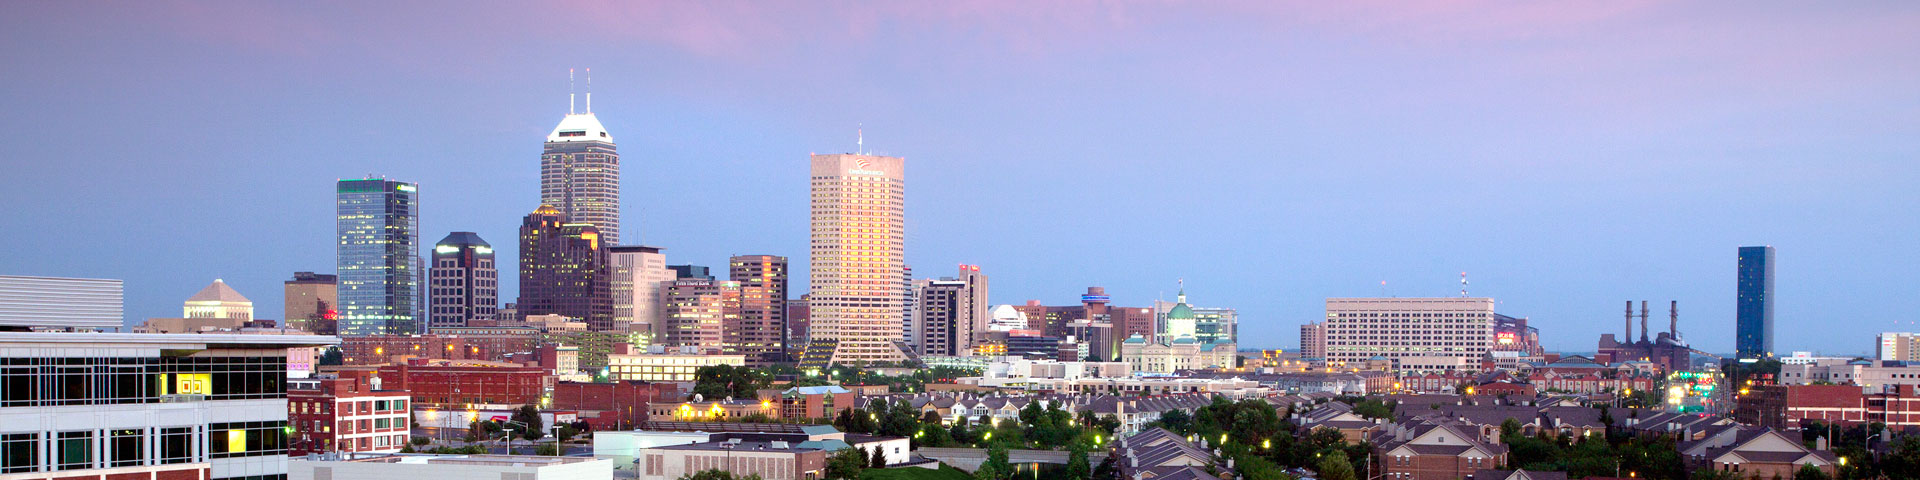 The Indianapolis skyline, with a blue-pink sky in the background.